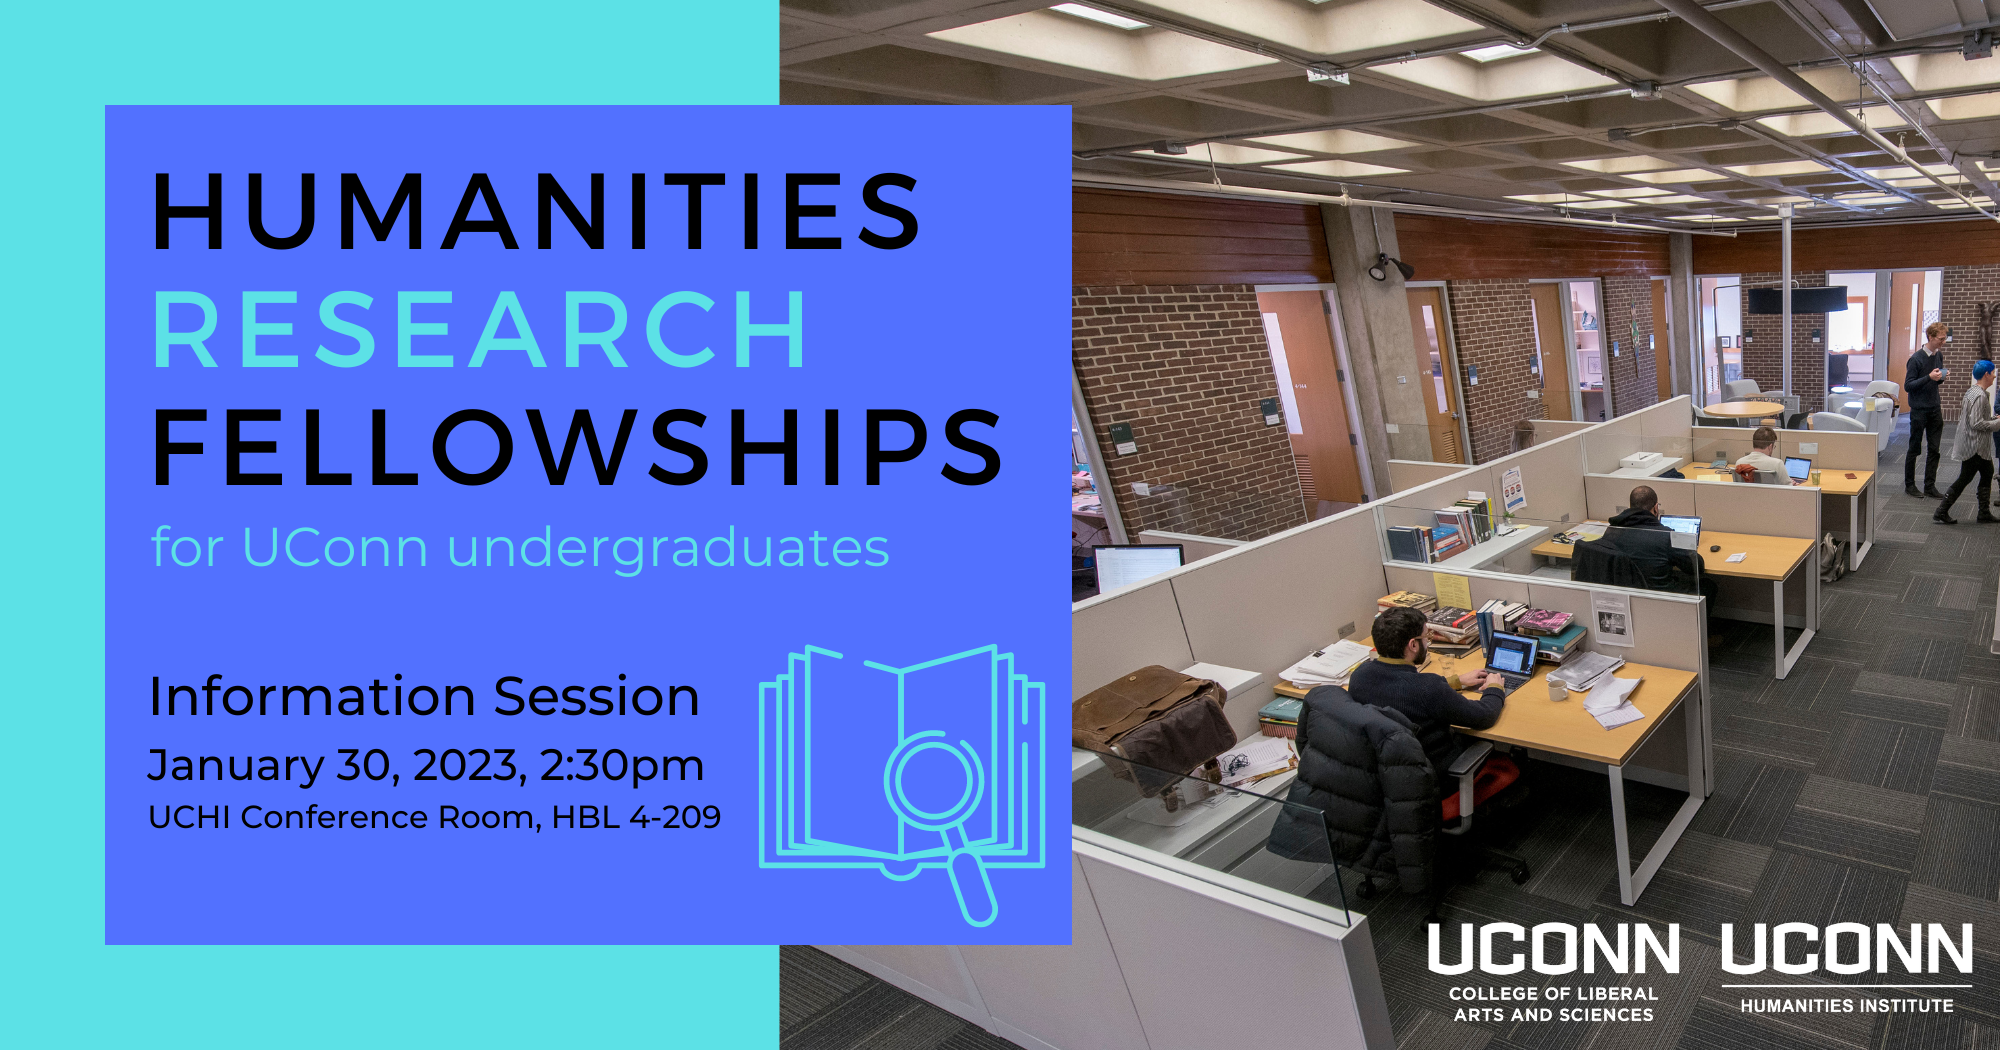 Humanities research fellowships for UConn undergraduates. Information Session. January 30, 2023, 2:30pm. Humanities Institute Conference Room